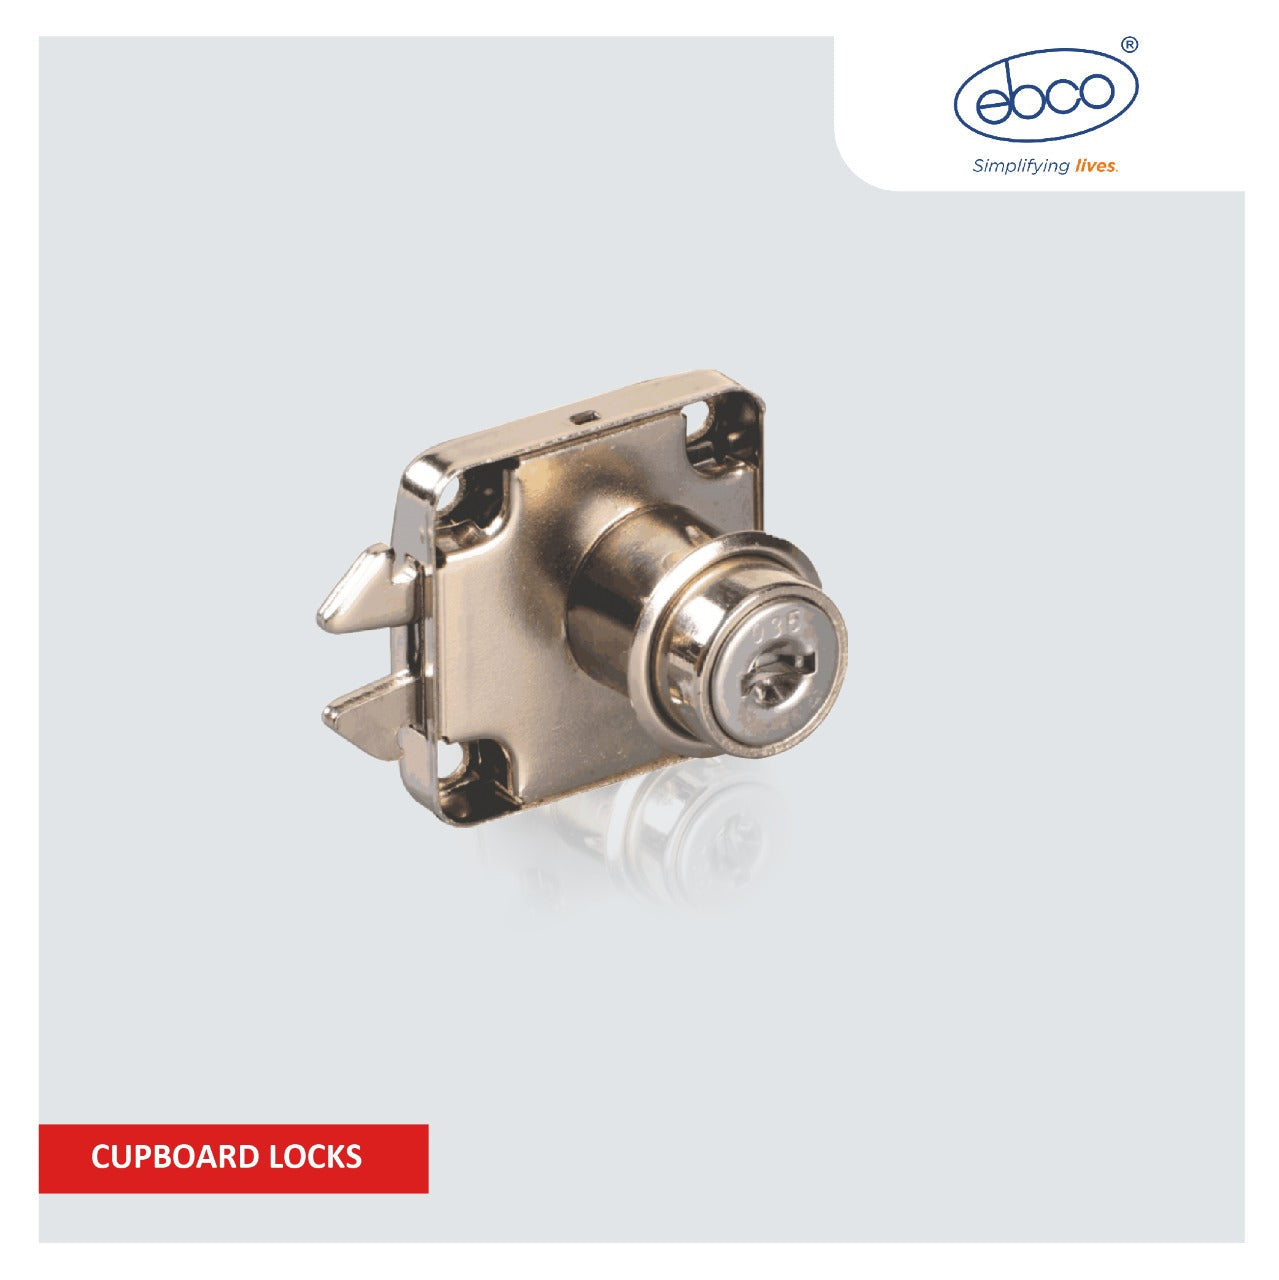 Ebco Cupboard Locks - Reliable security for your cabinets at M. M. Noorbhoy & Co.